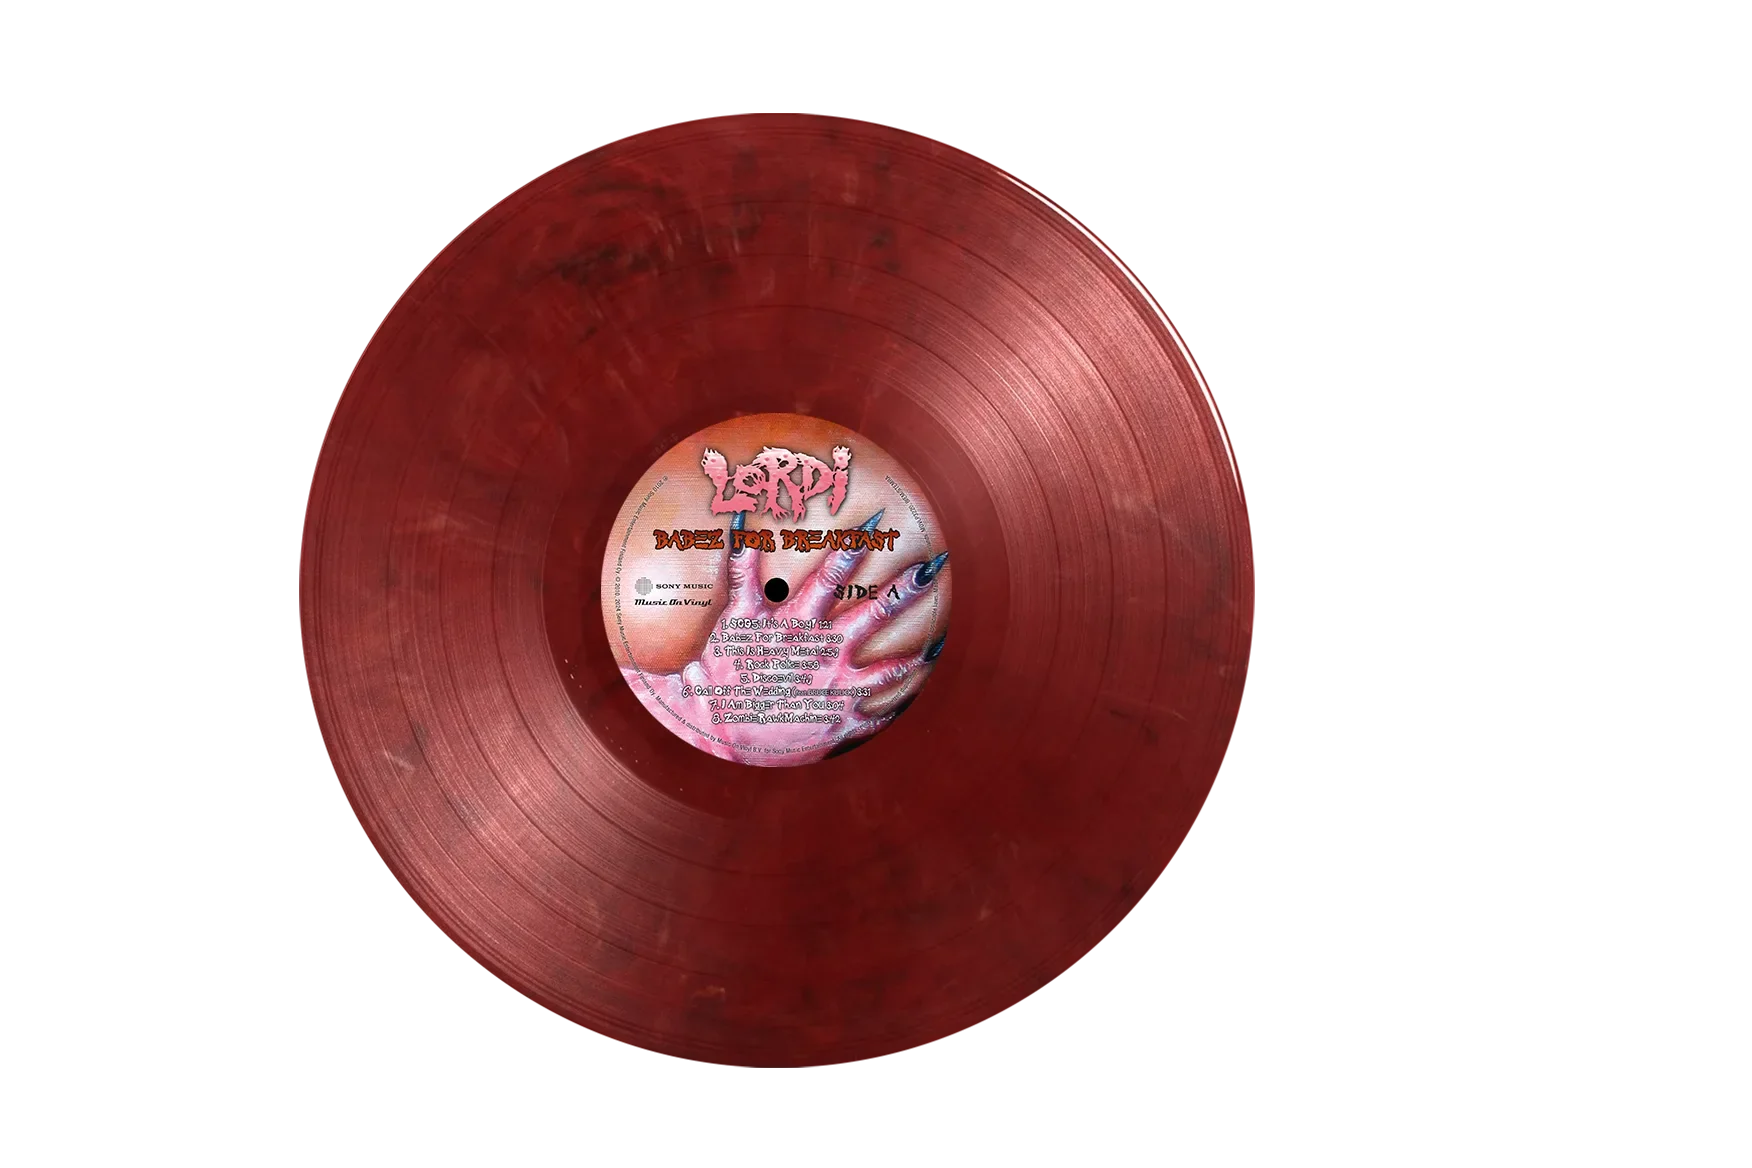 LORDI - Babez For Breakfast (2024 Reissue with Sticker Sheet) - LP - 180g Blood Red and Black Marbled Vinyl [JUN 21]